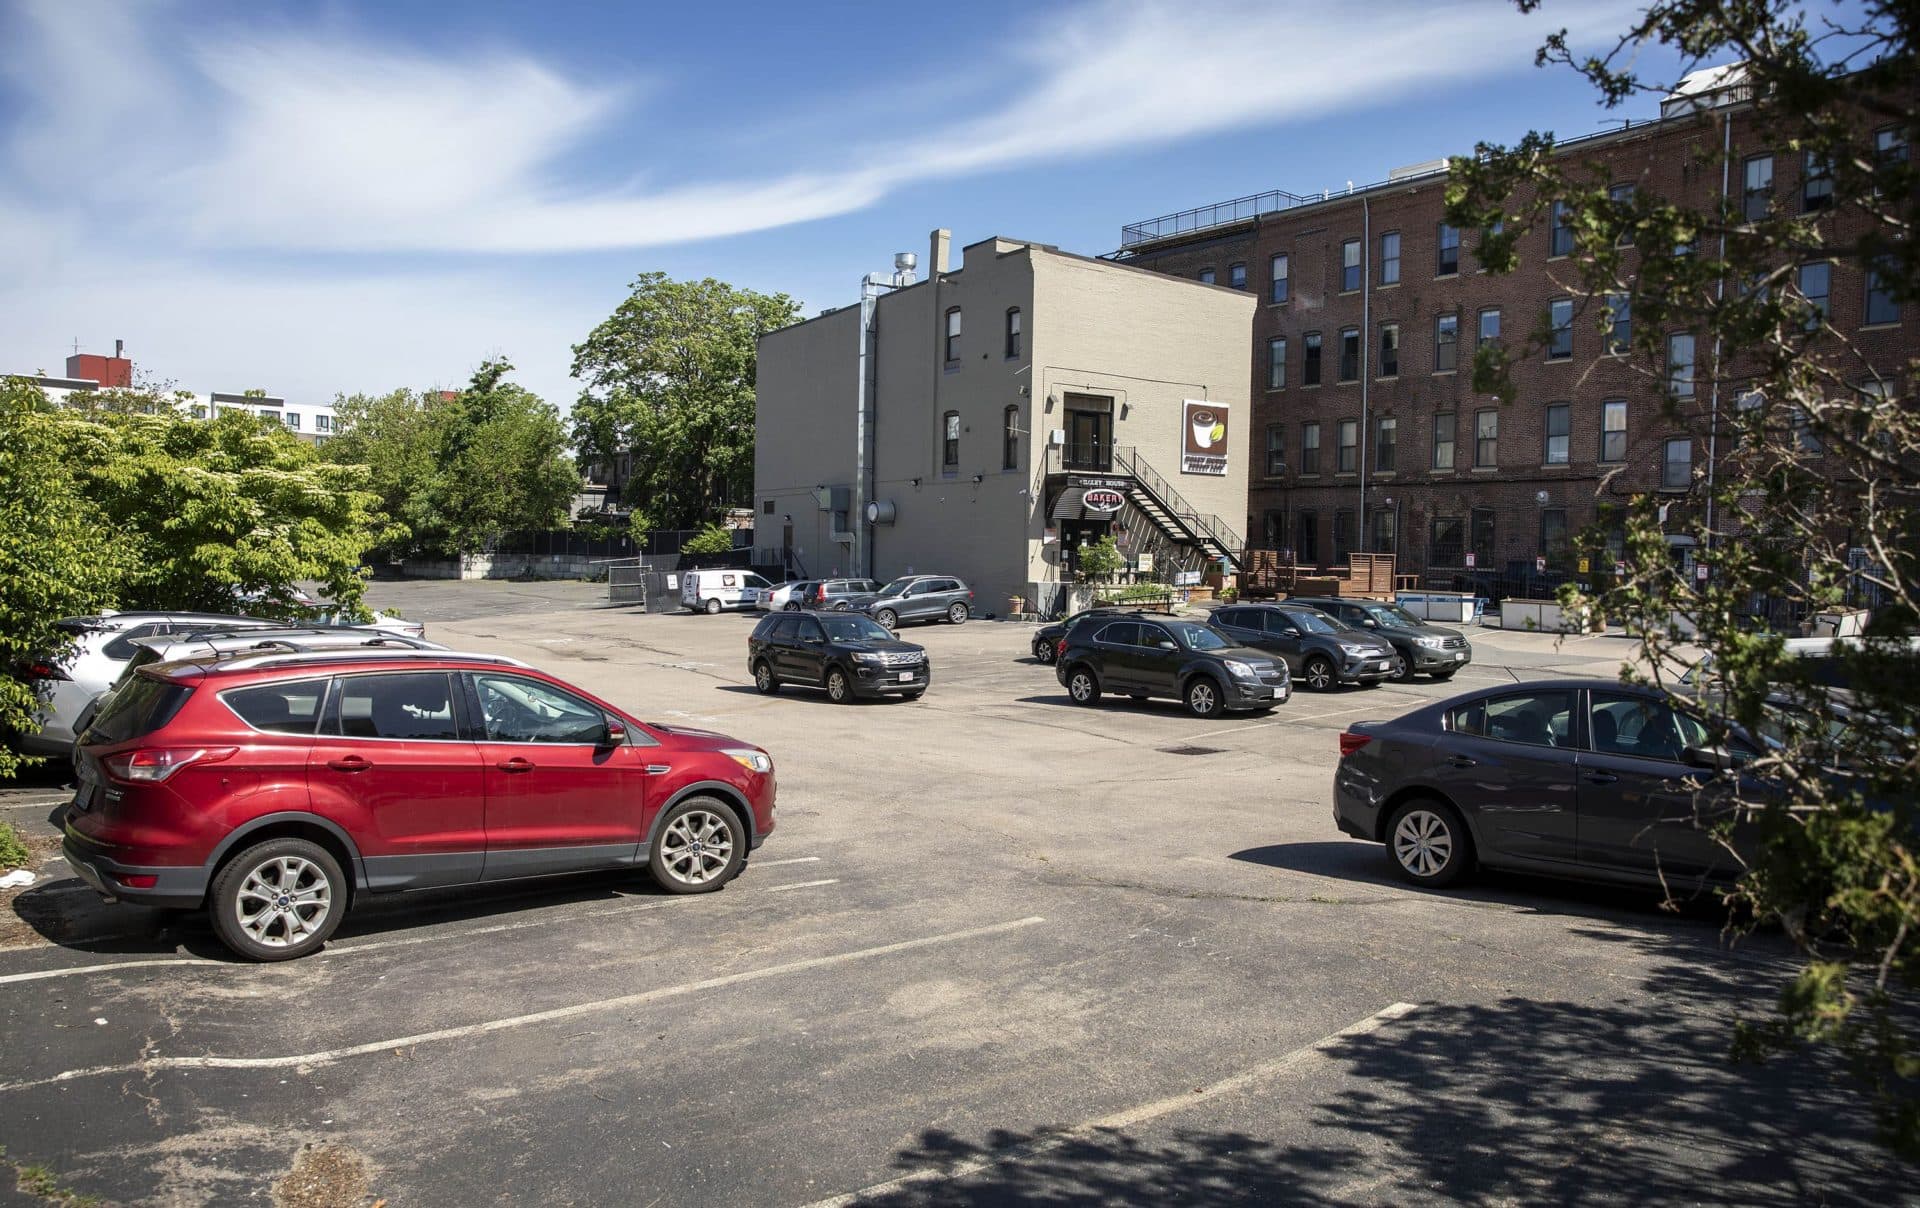 The parking lot at 2147 Washington Street where the new 6-story mixed-use passive house building will be developed. (Robin Lubbock/WBUR)